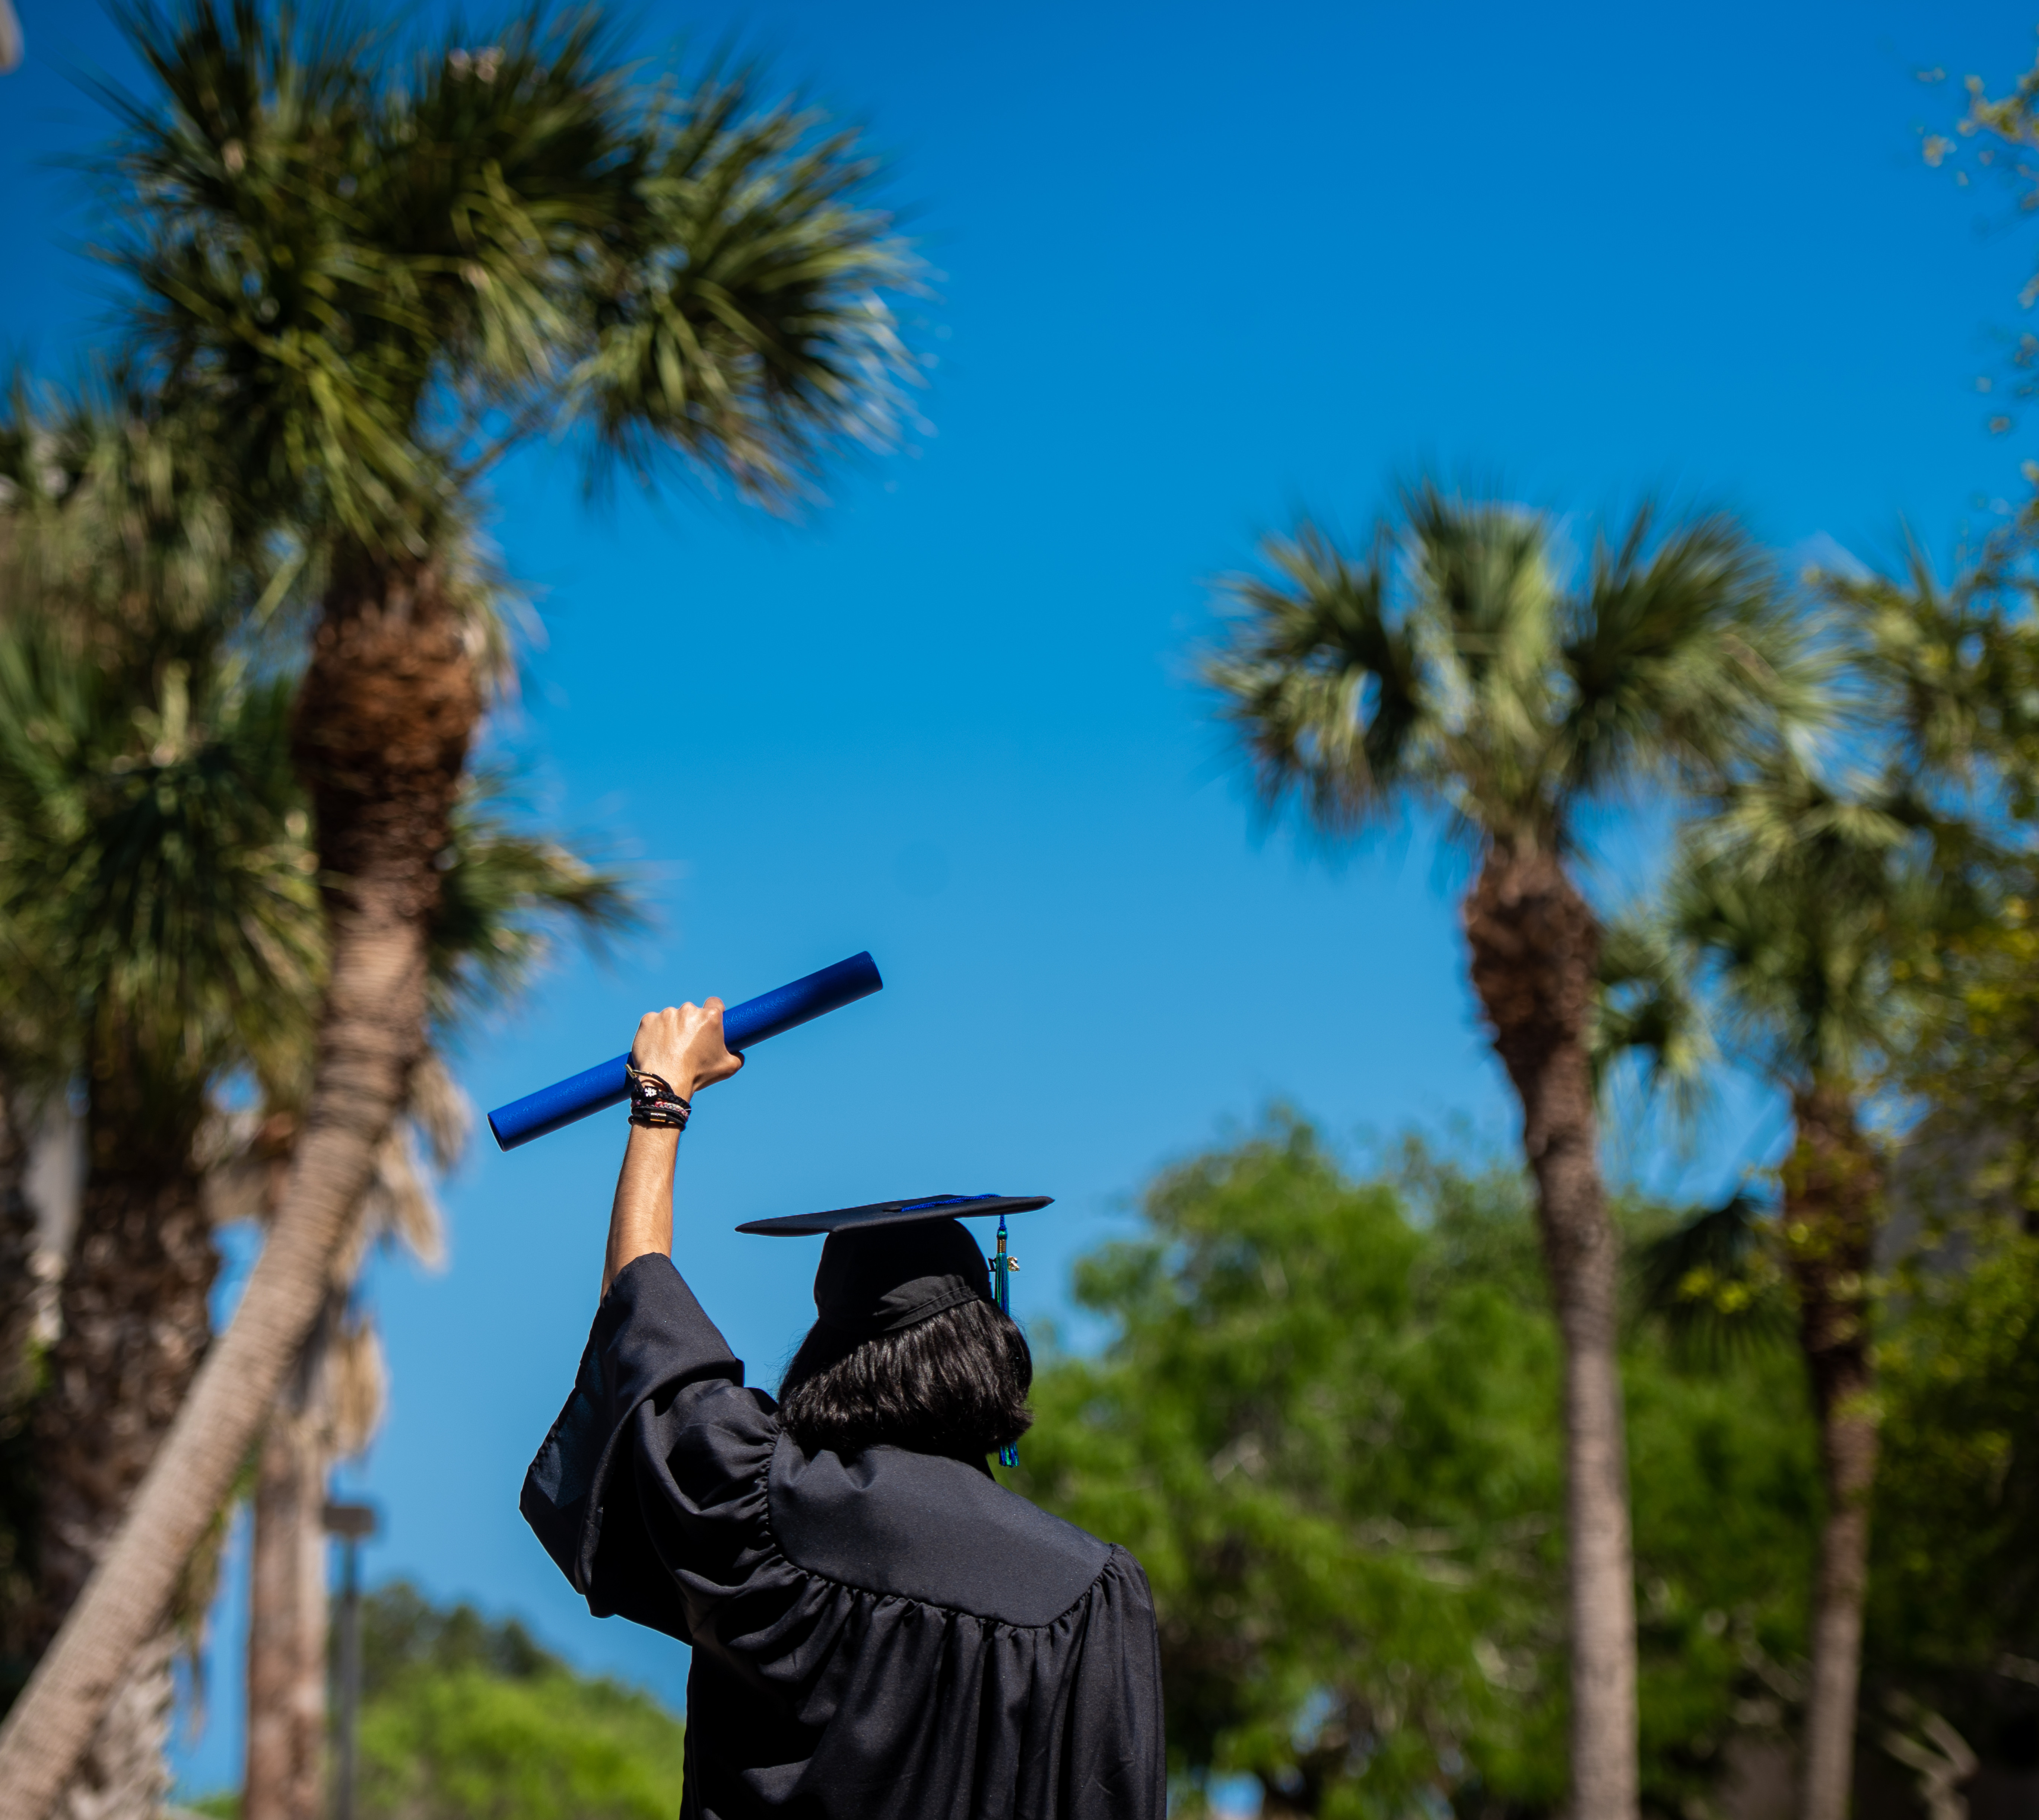 in the center you see the back of a college graduate holding up their degree in their left hand. framing them is the tops of palm trees on a sunny coastal day.